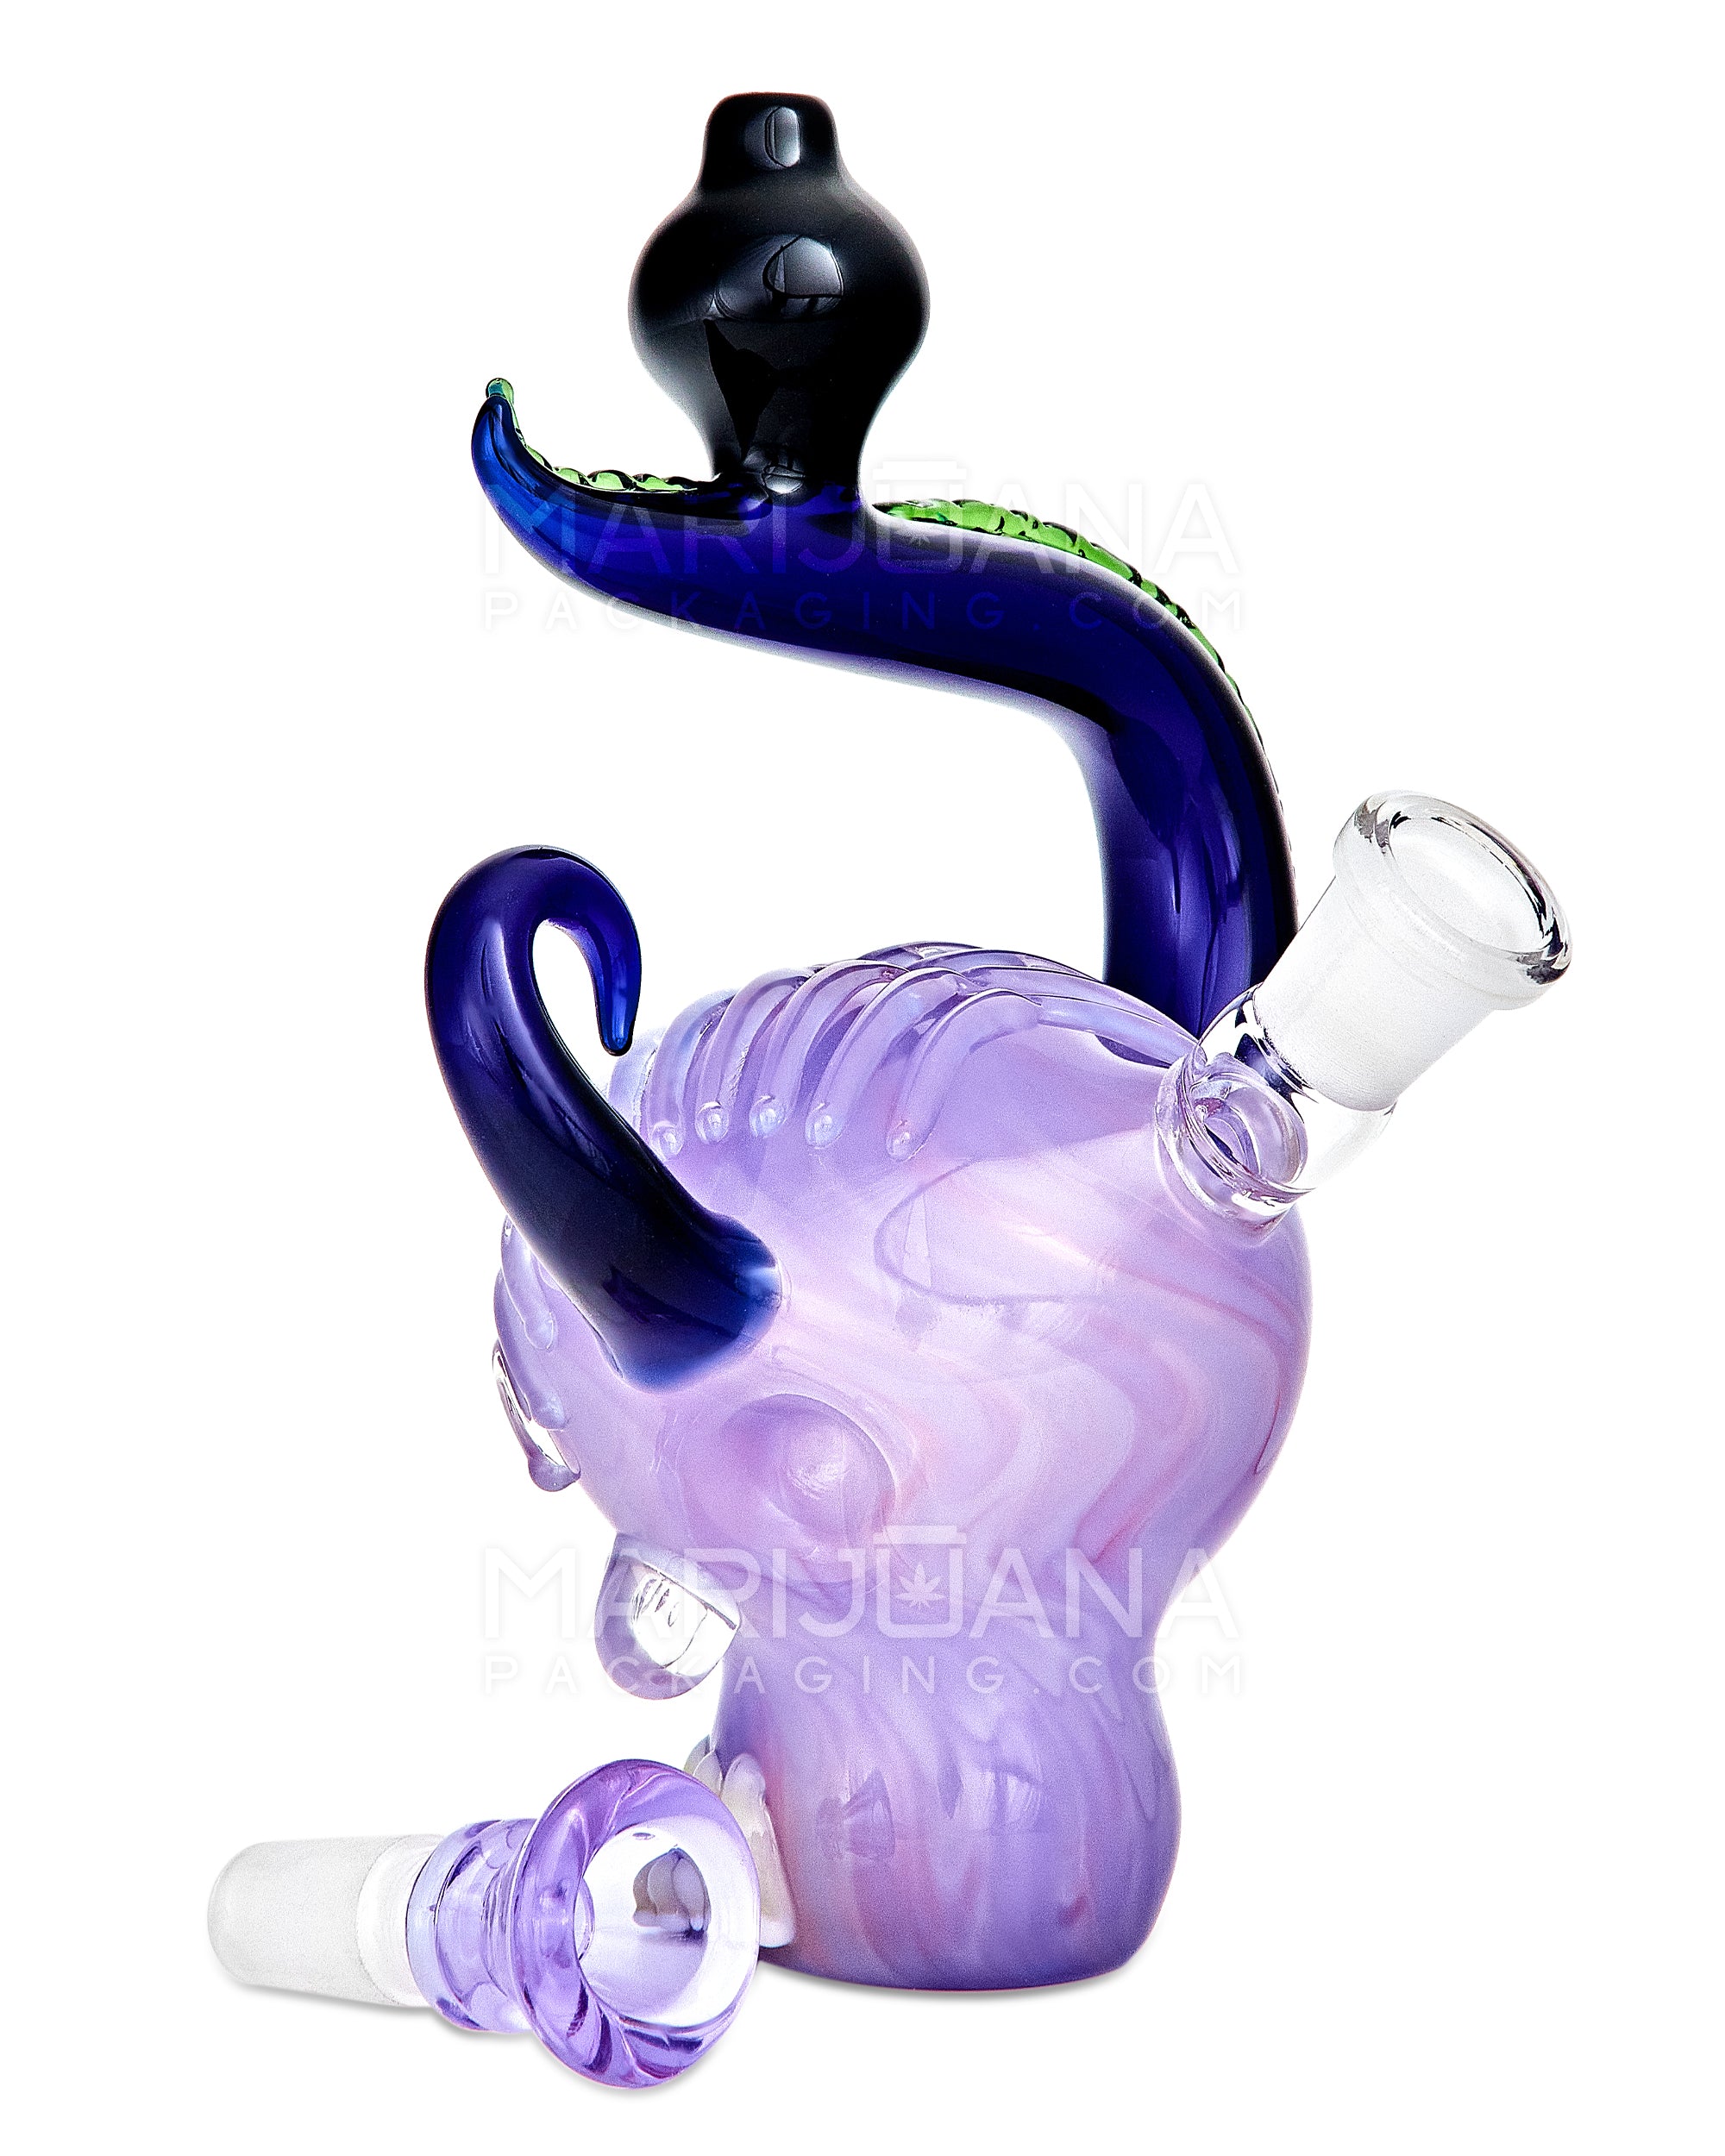 Heady | Lantern Neck Crystal Skull Head Glass Water Pipe w/ Double Knockers | 7.5in Tall - 14mm Bowl - Assorted - 3